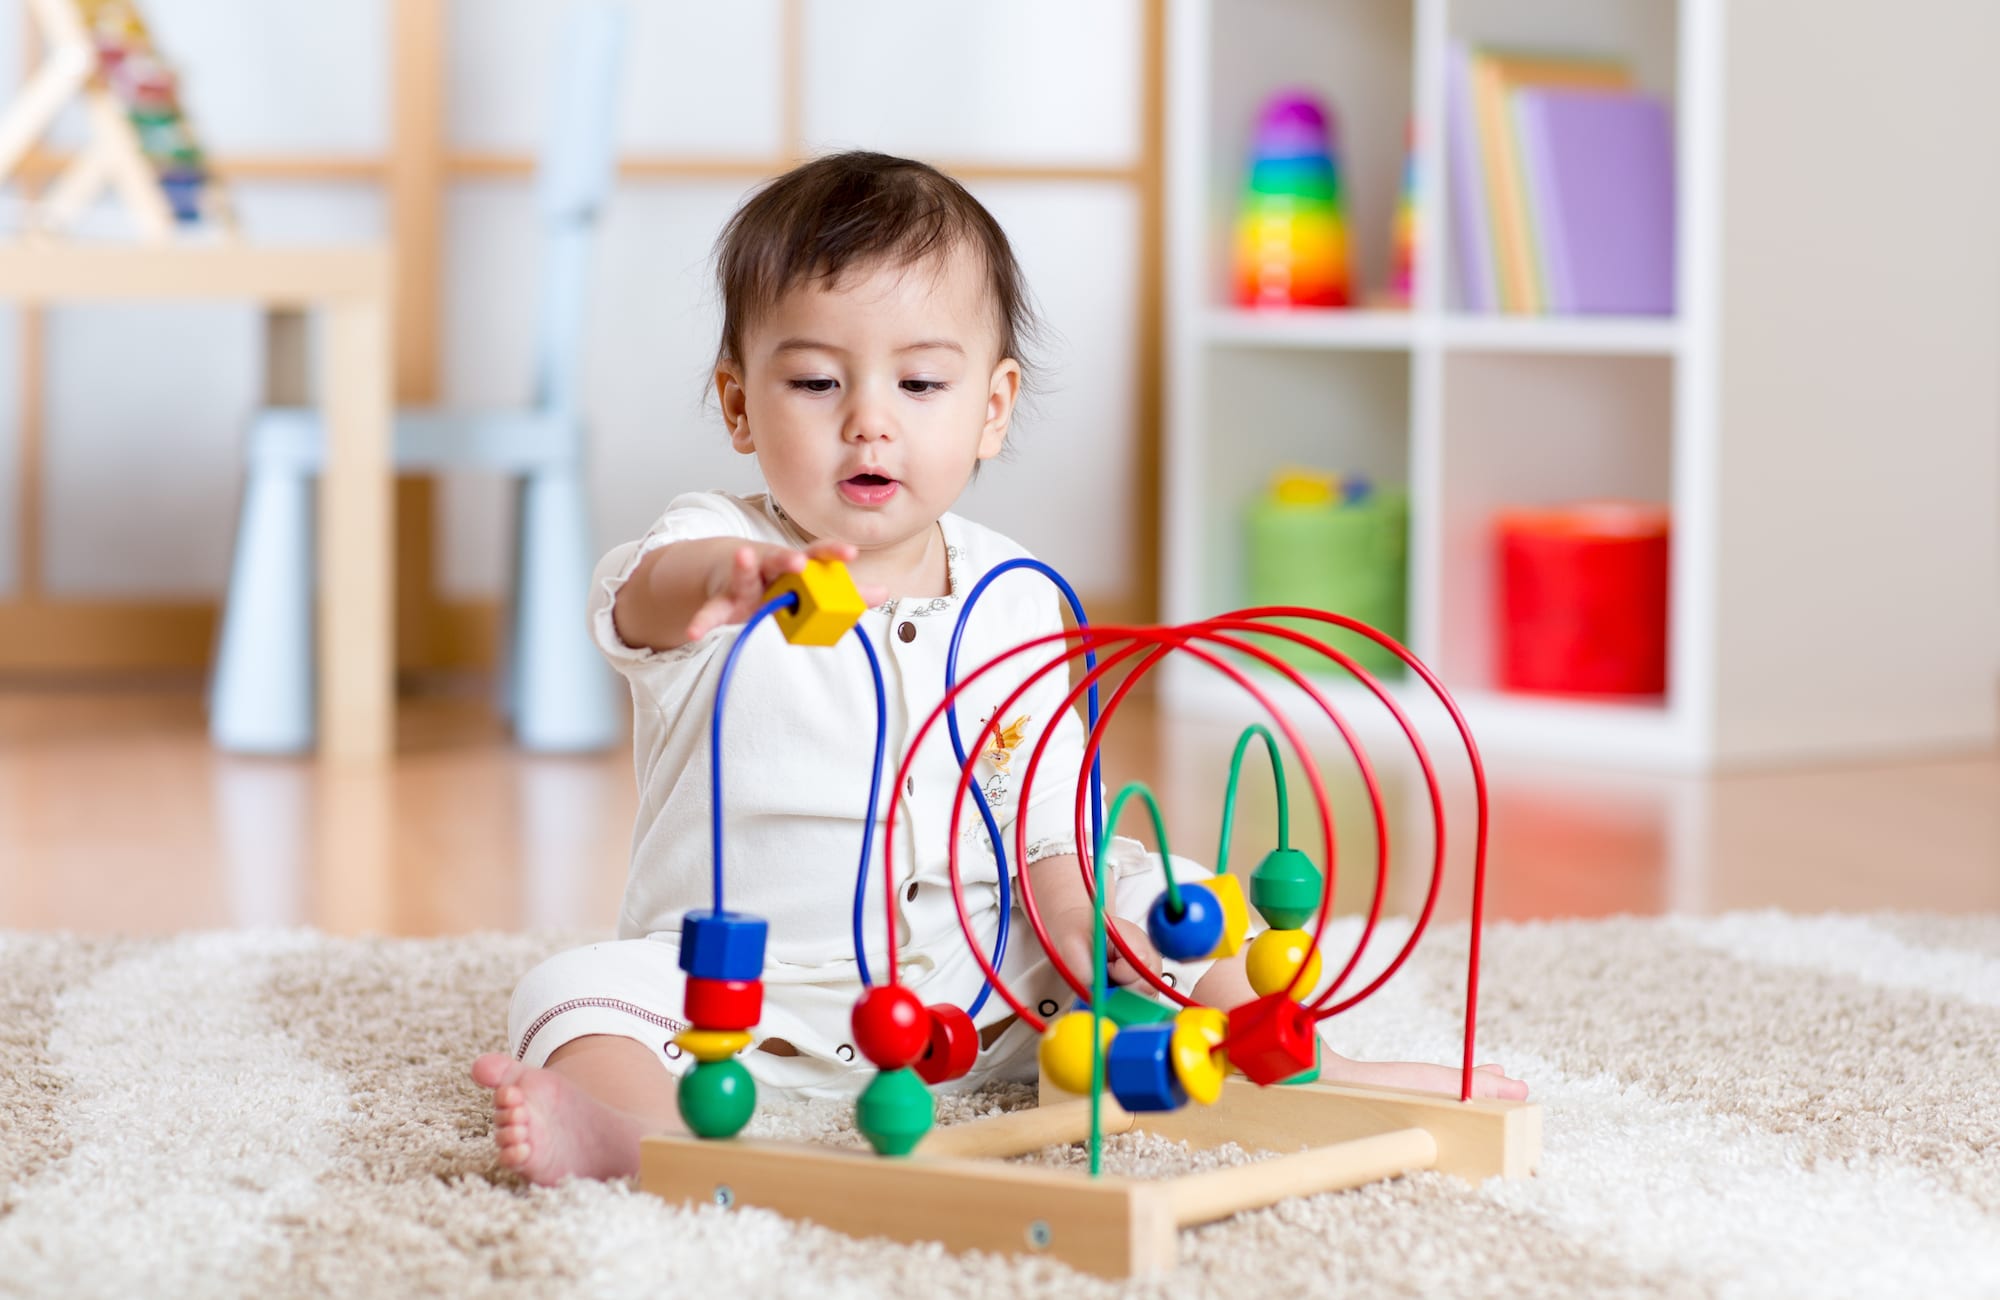 Baby Learning And Development Toys